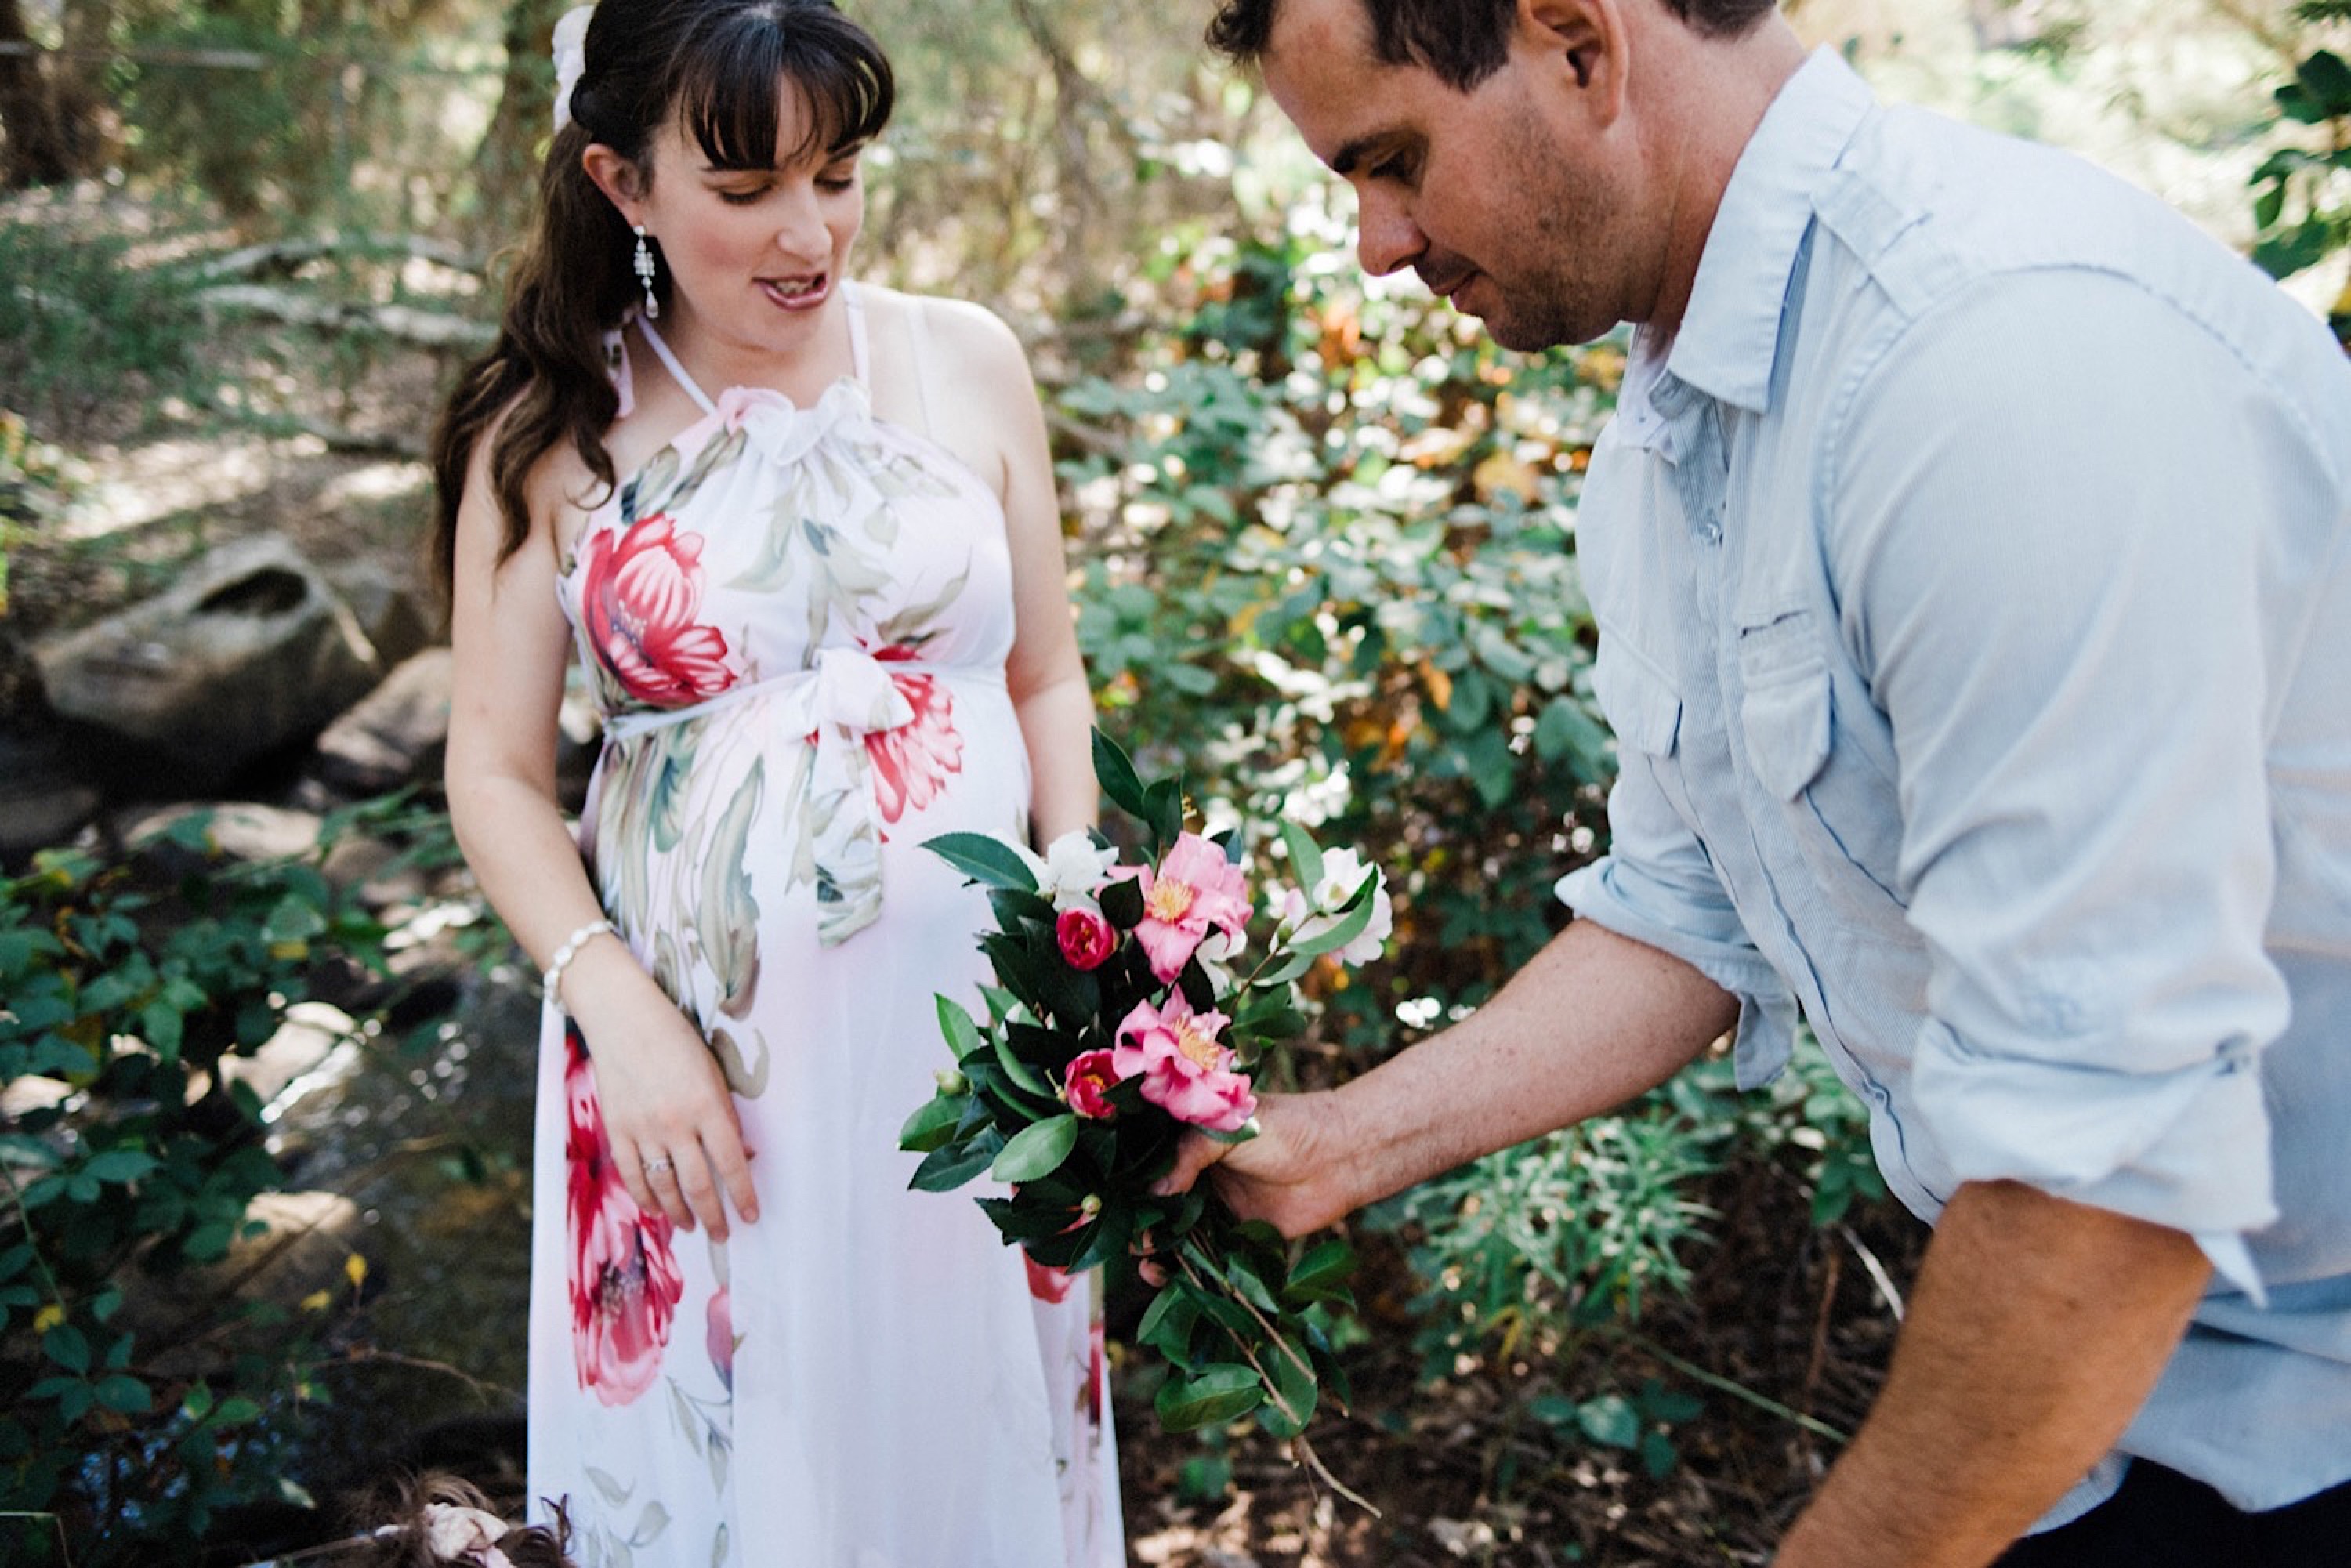 A candid portrait of a young Father giving his wife flowers that he picked for her during an Adventure Photo Session.